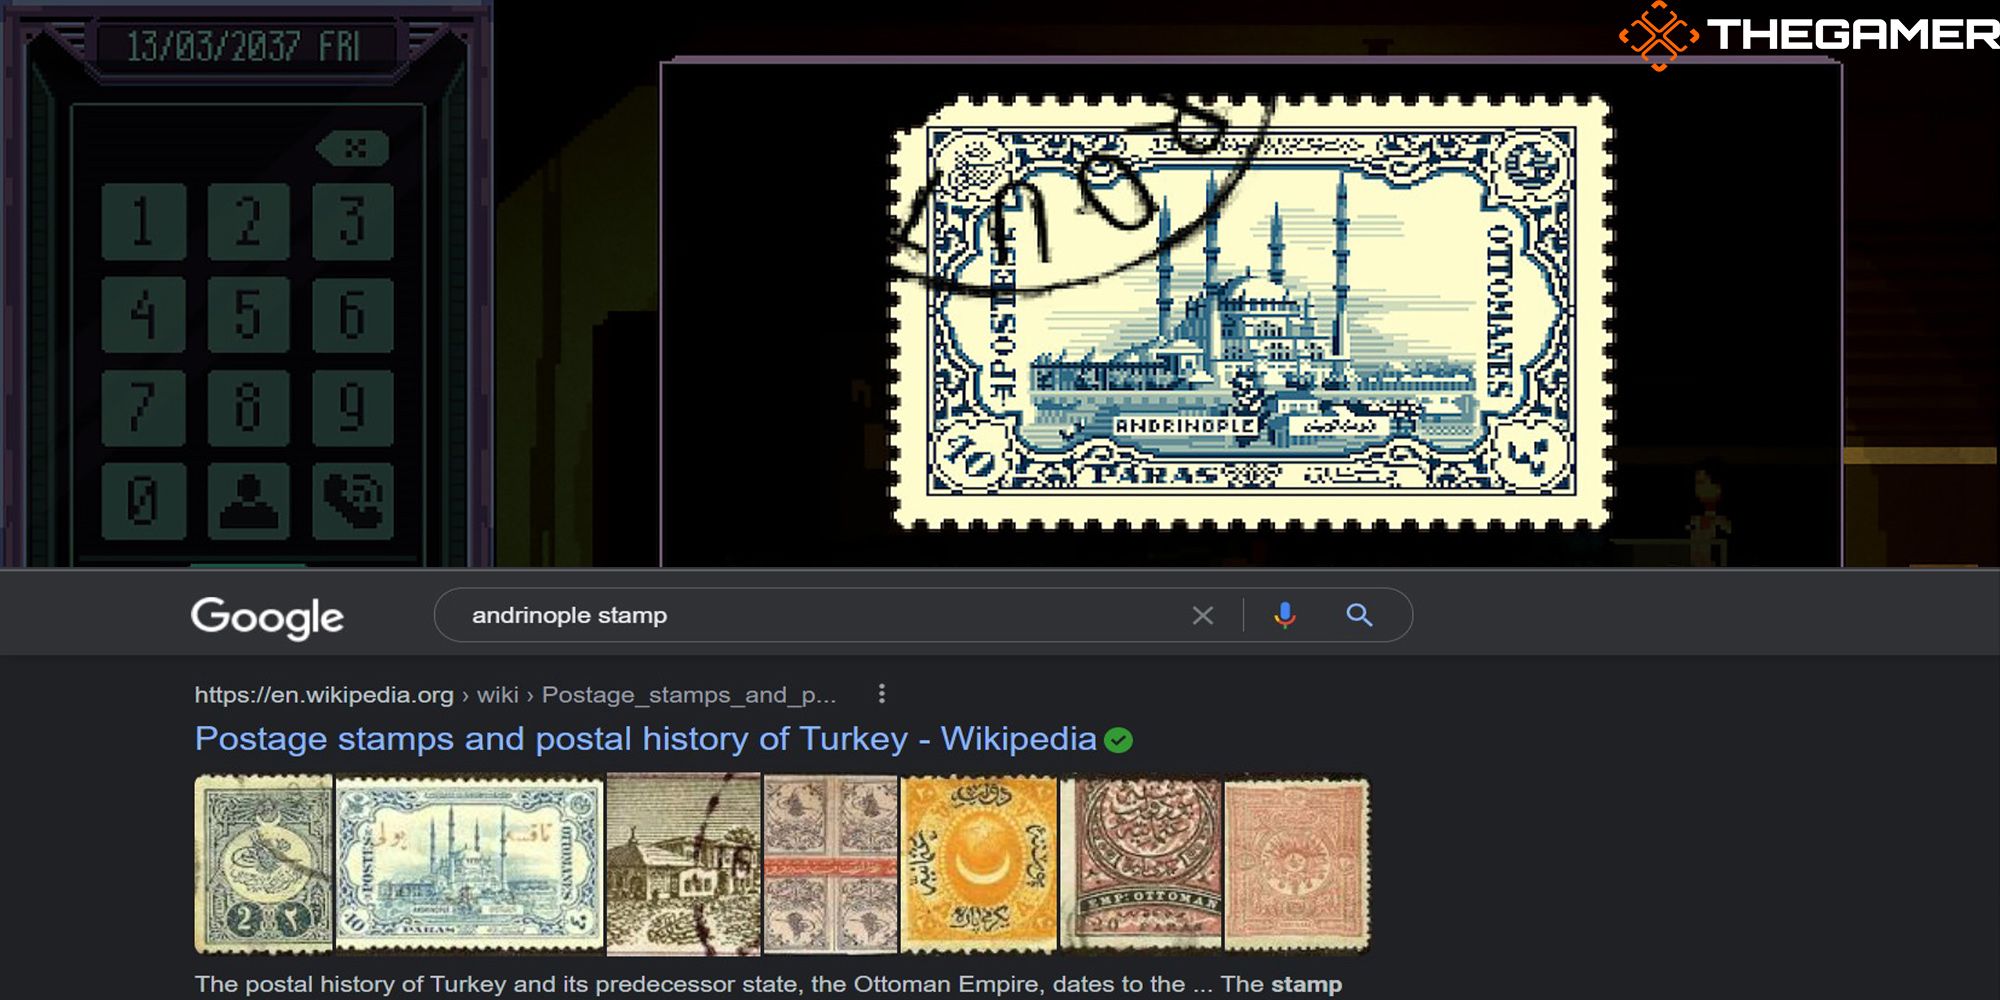 A google search indicates that the Andrinople stamp in Chinatown Detective Agency originates from Turkey.